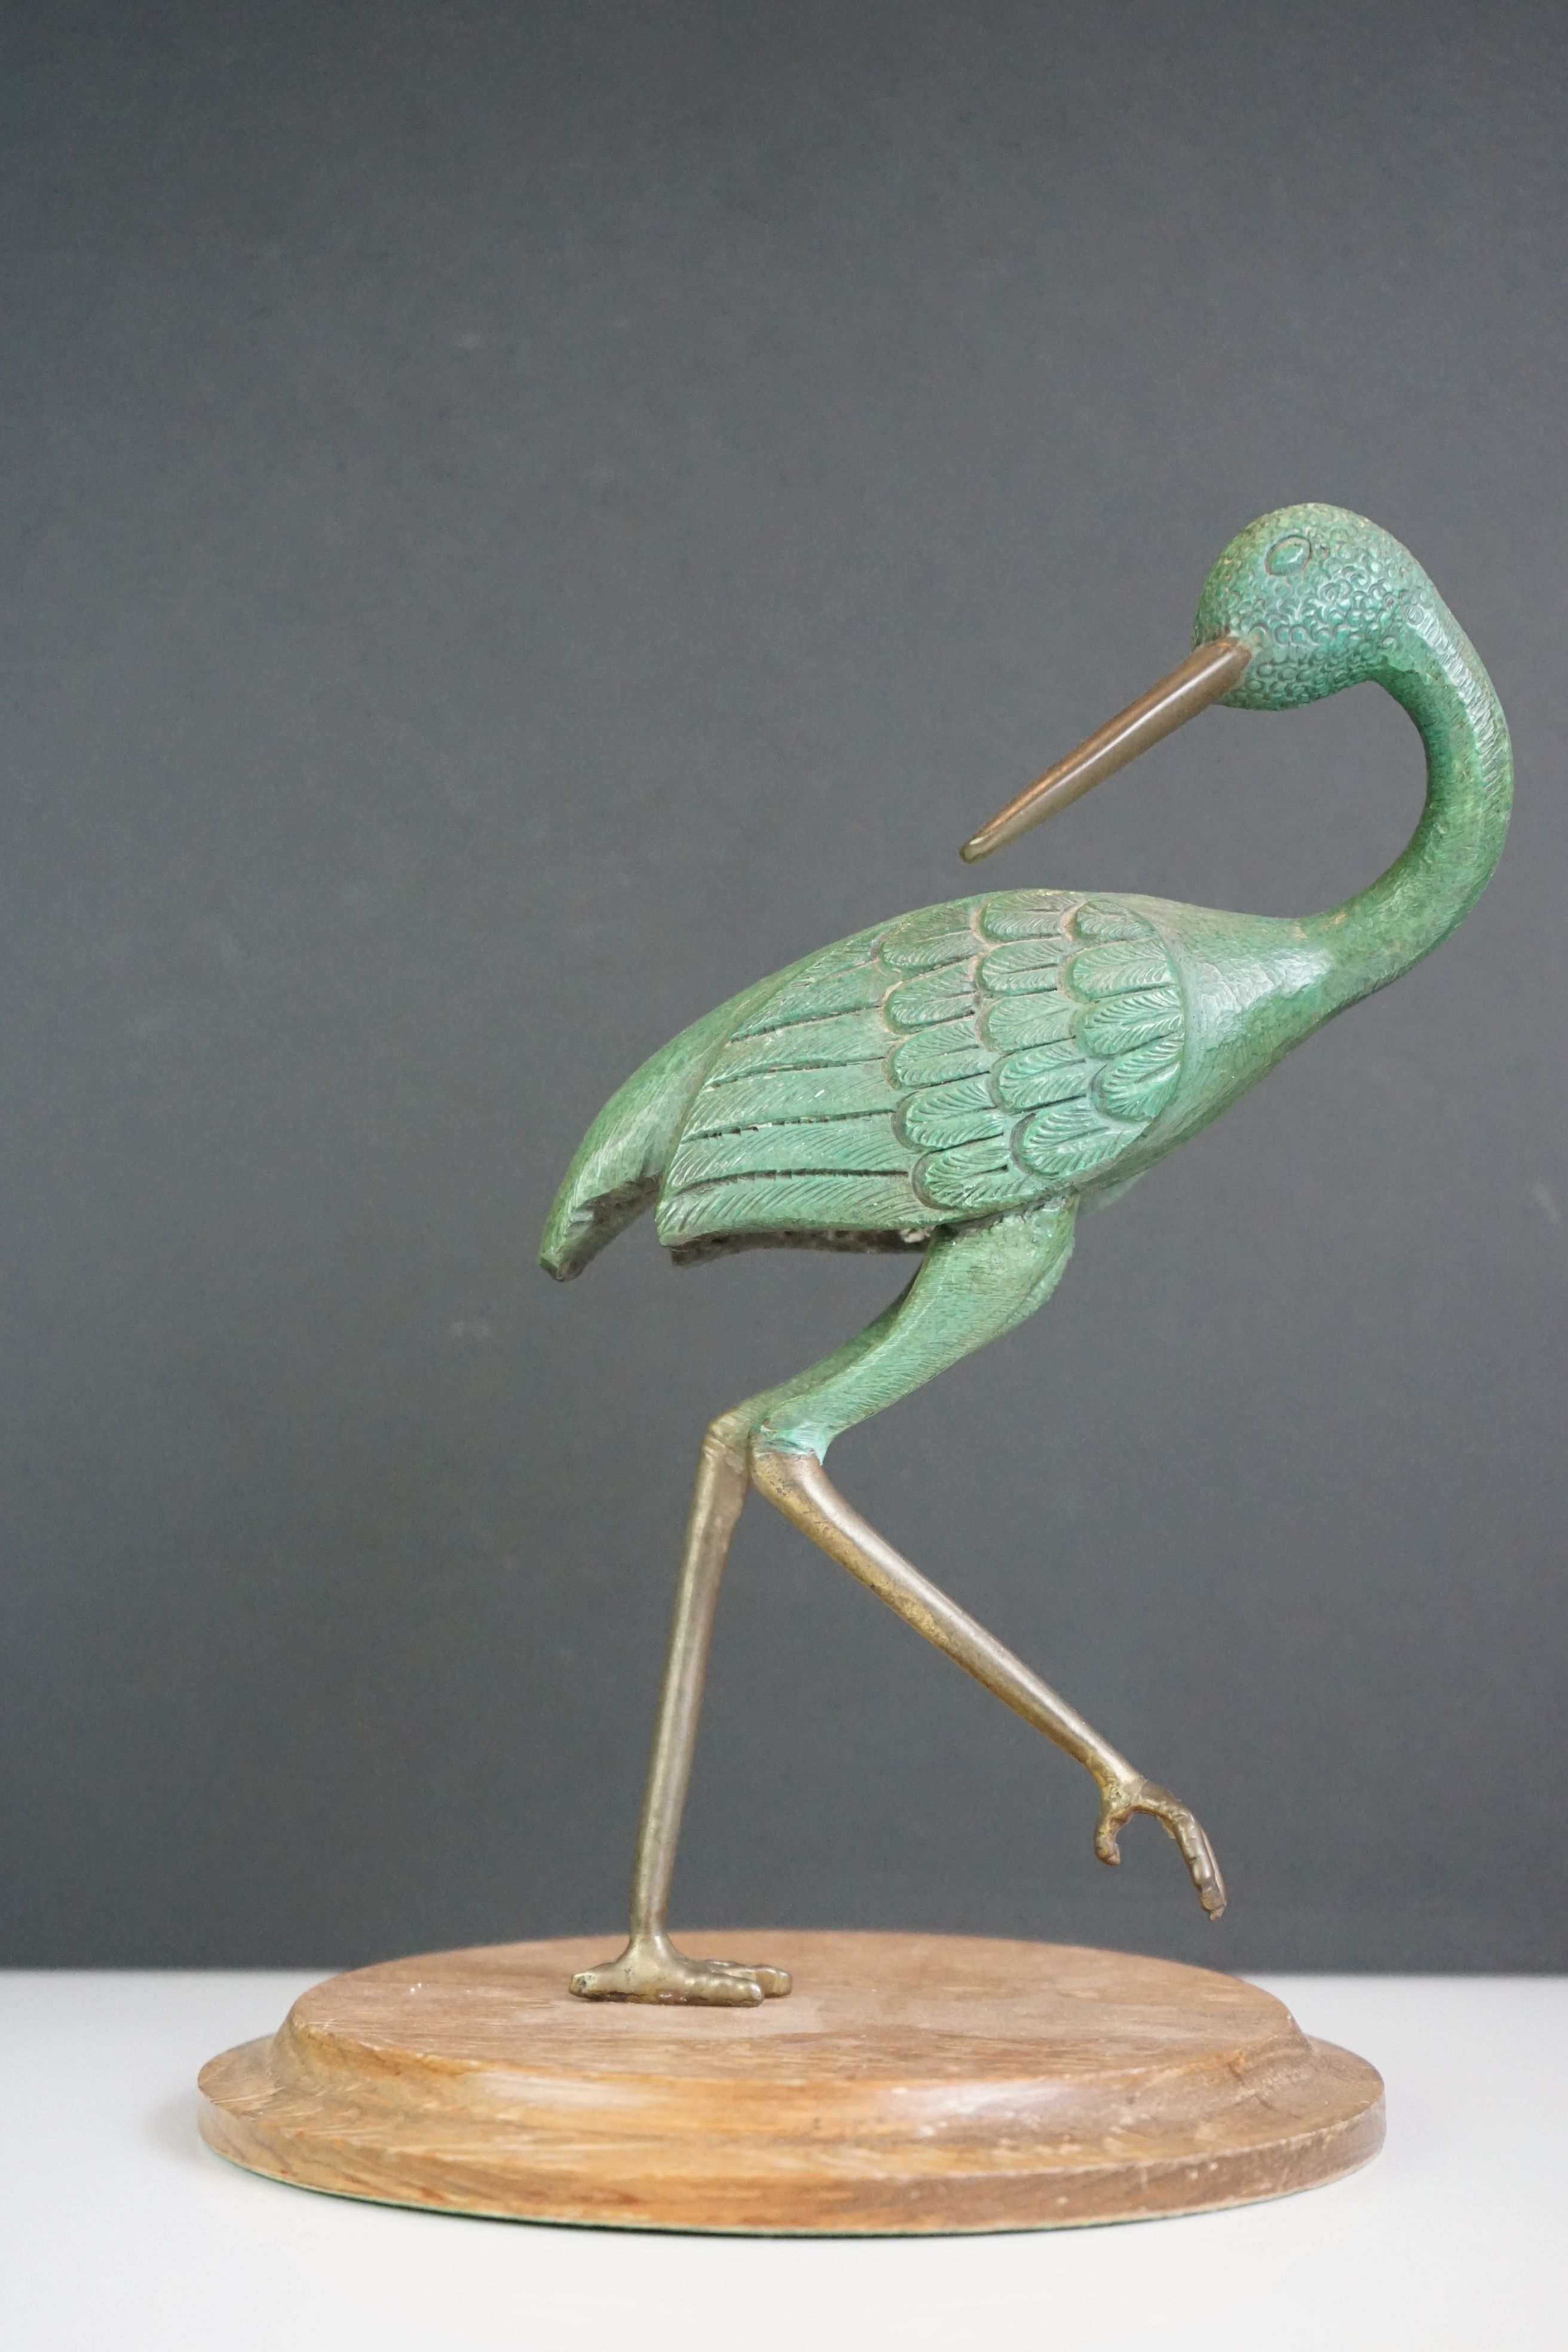 Painted sculpture of a bronze wader type bird, mounted on a wooden plinth